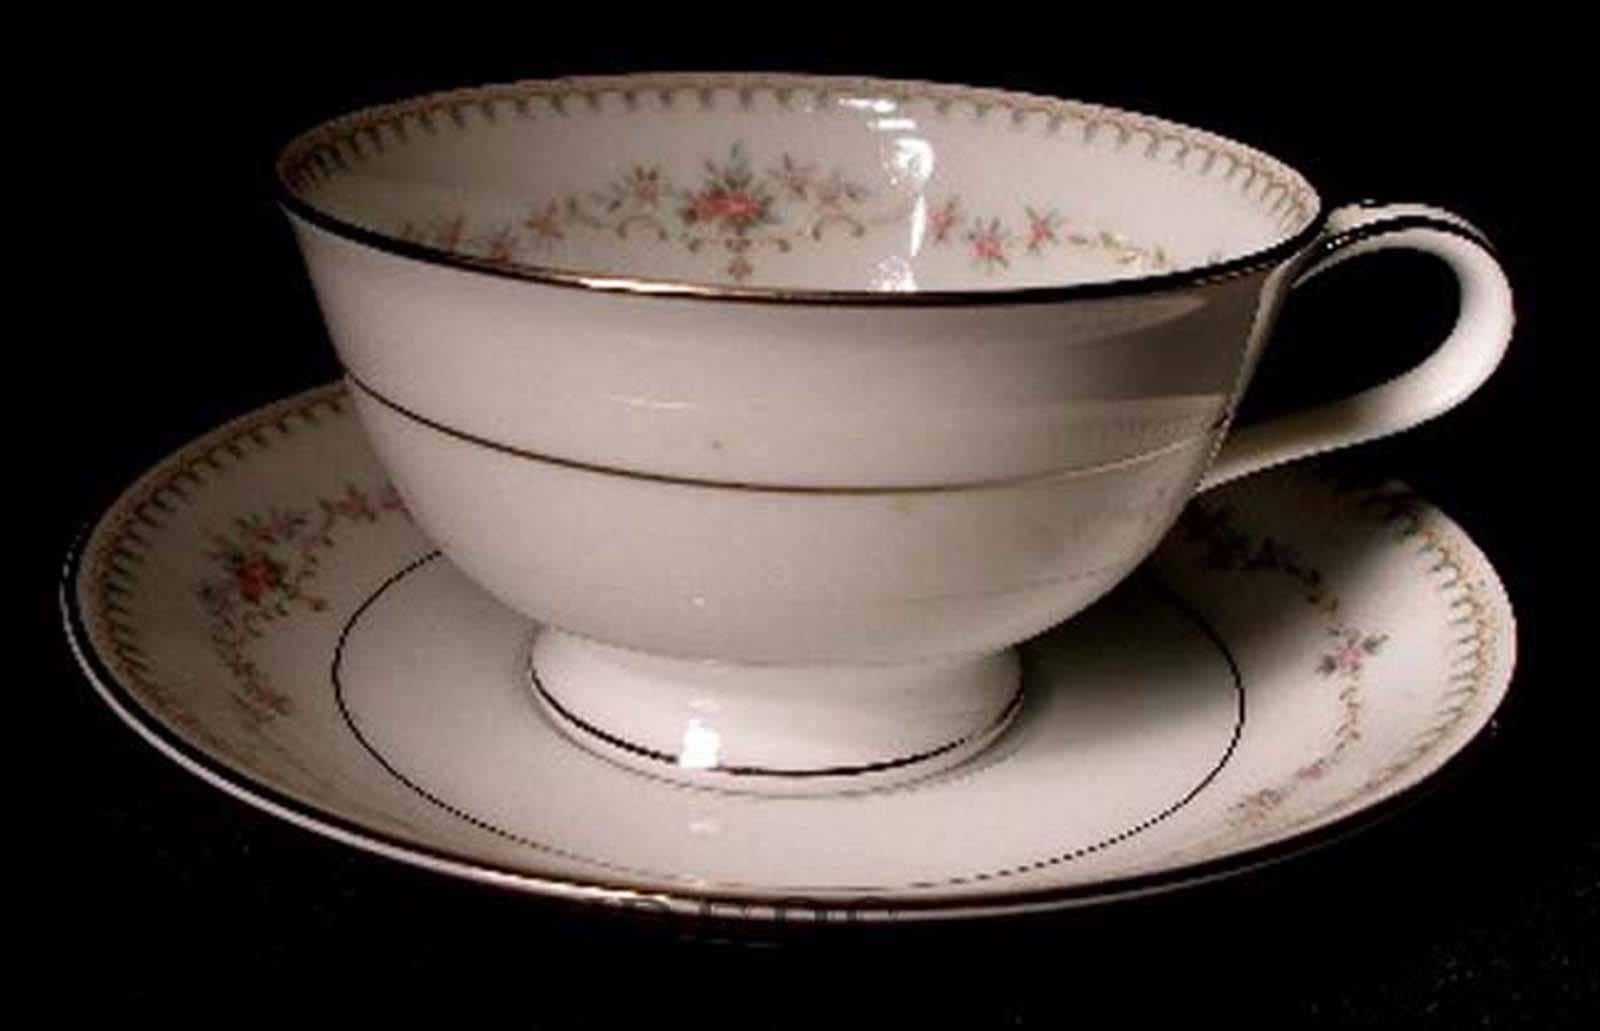 CHINA FINDERS 

China, Crystal, Flatware and Collectible Matching Service is offering ONE (1) 

NORITAKE china FAIRMONT 6102 pattern 62-piece Set Service

in great condition free from chips, cracks, break or stain.

• Pink Roses with Green